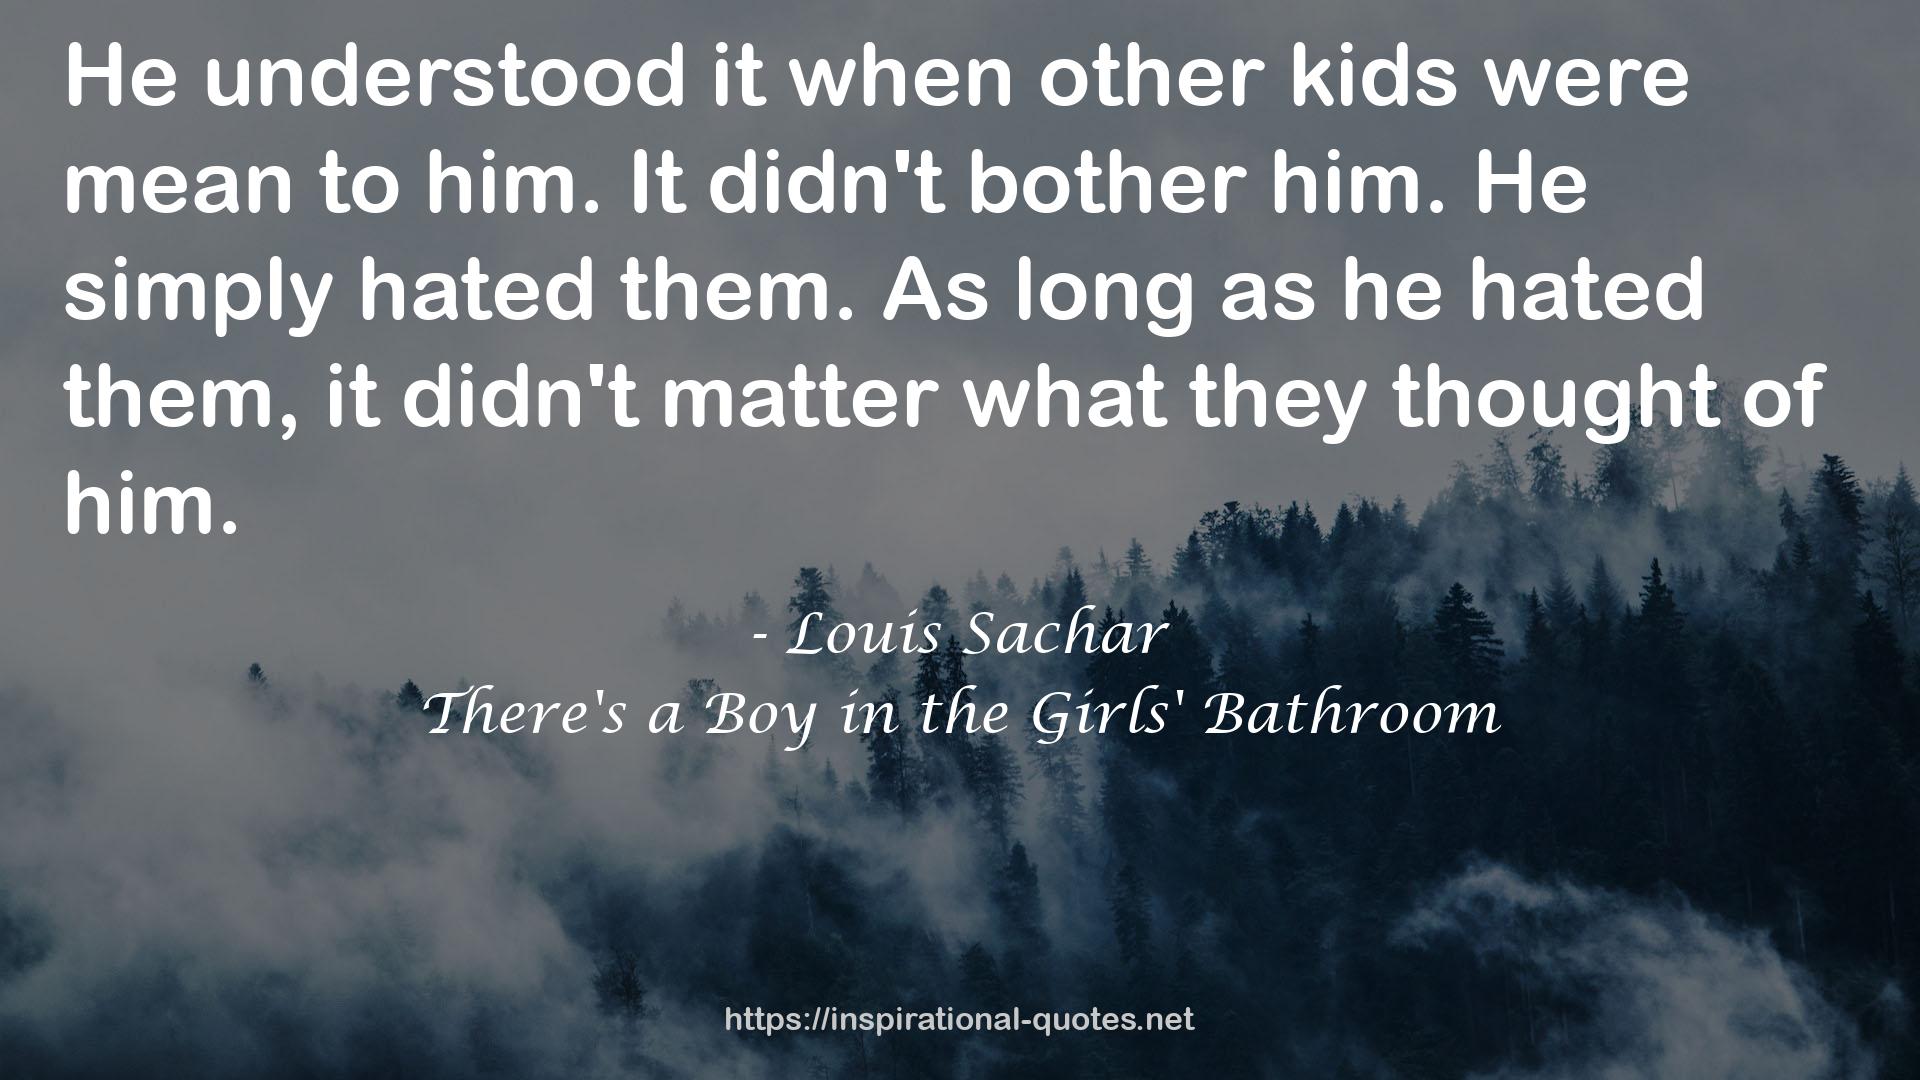 There's a Boy in the Girls' Bathroom QUOTES